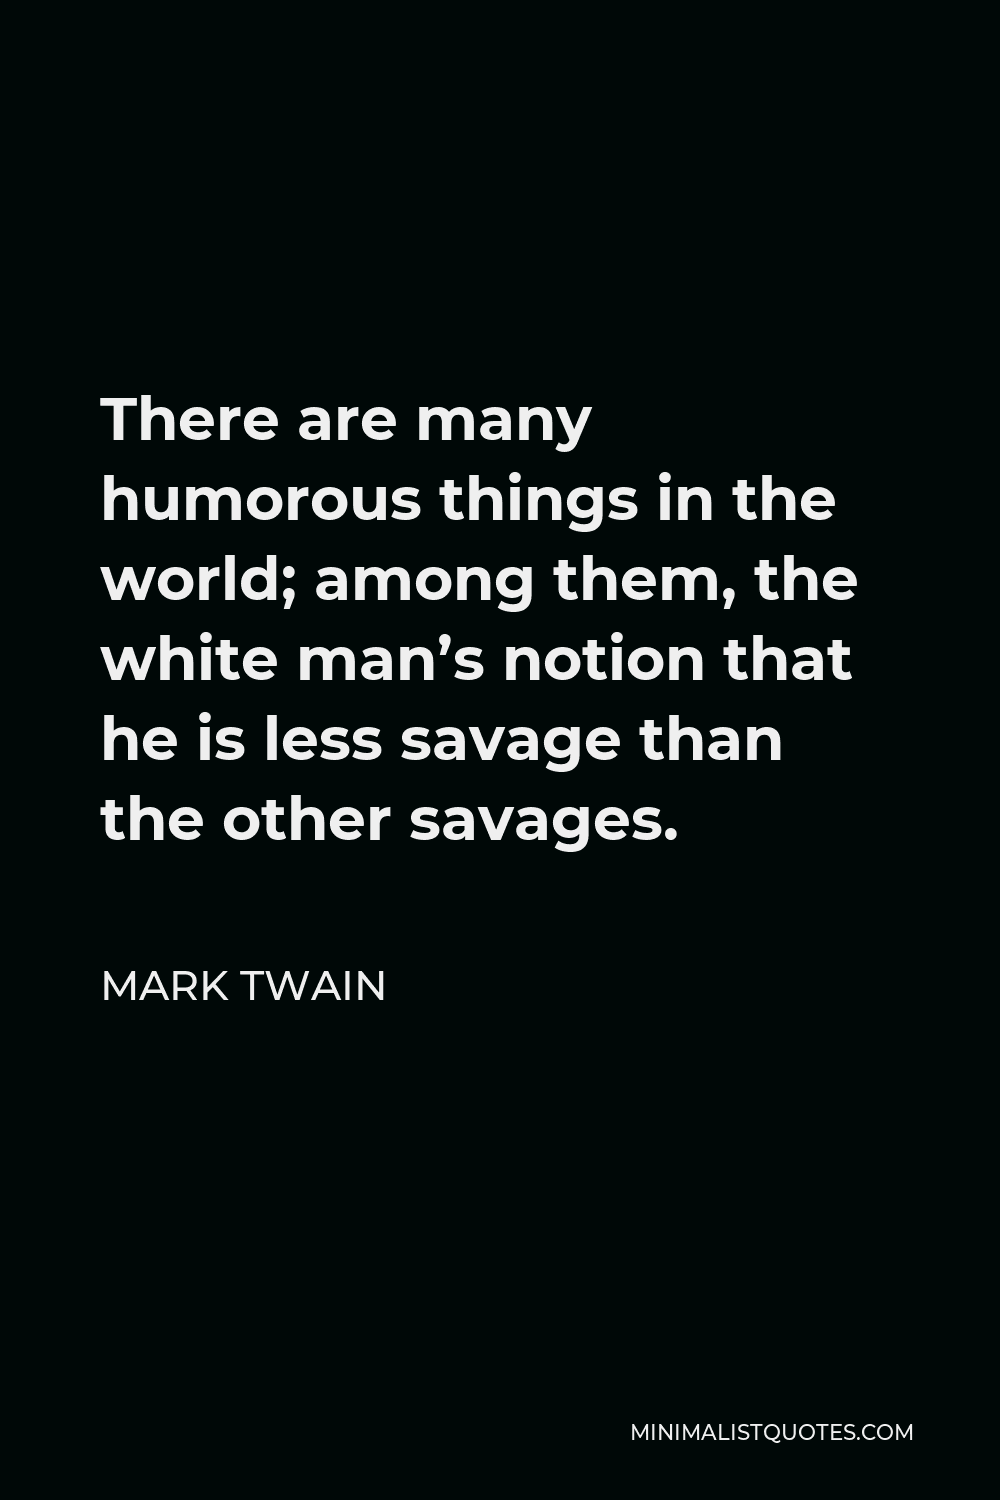 Mark Twain Quote - There are many humorous things in the world; among them, the white man’s notion that he is less savage than the other savages.